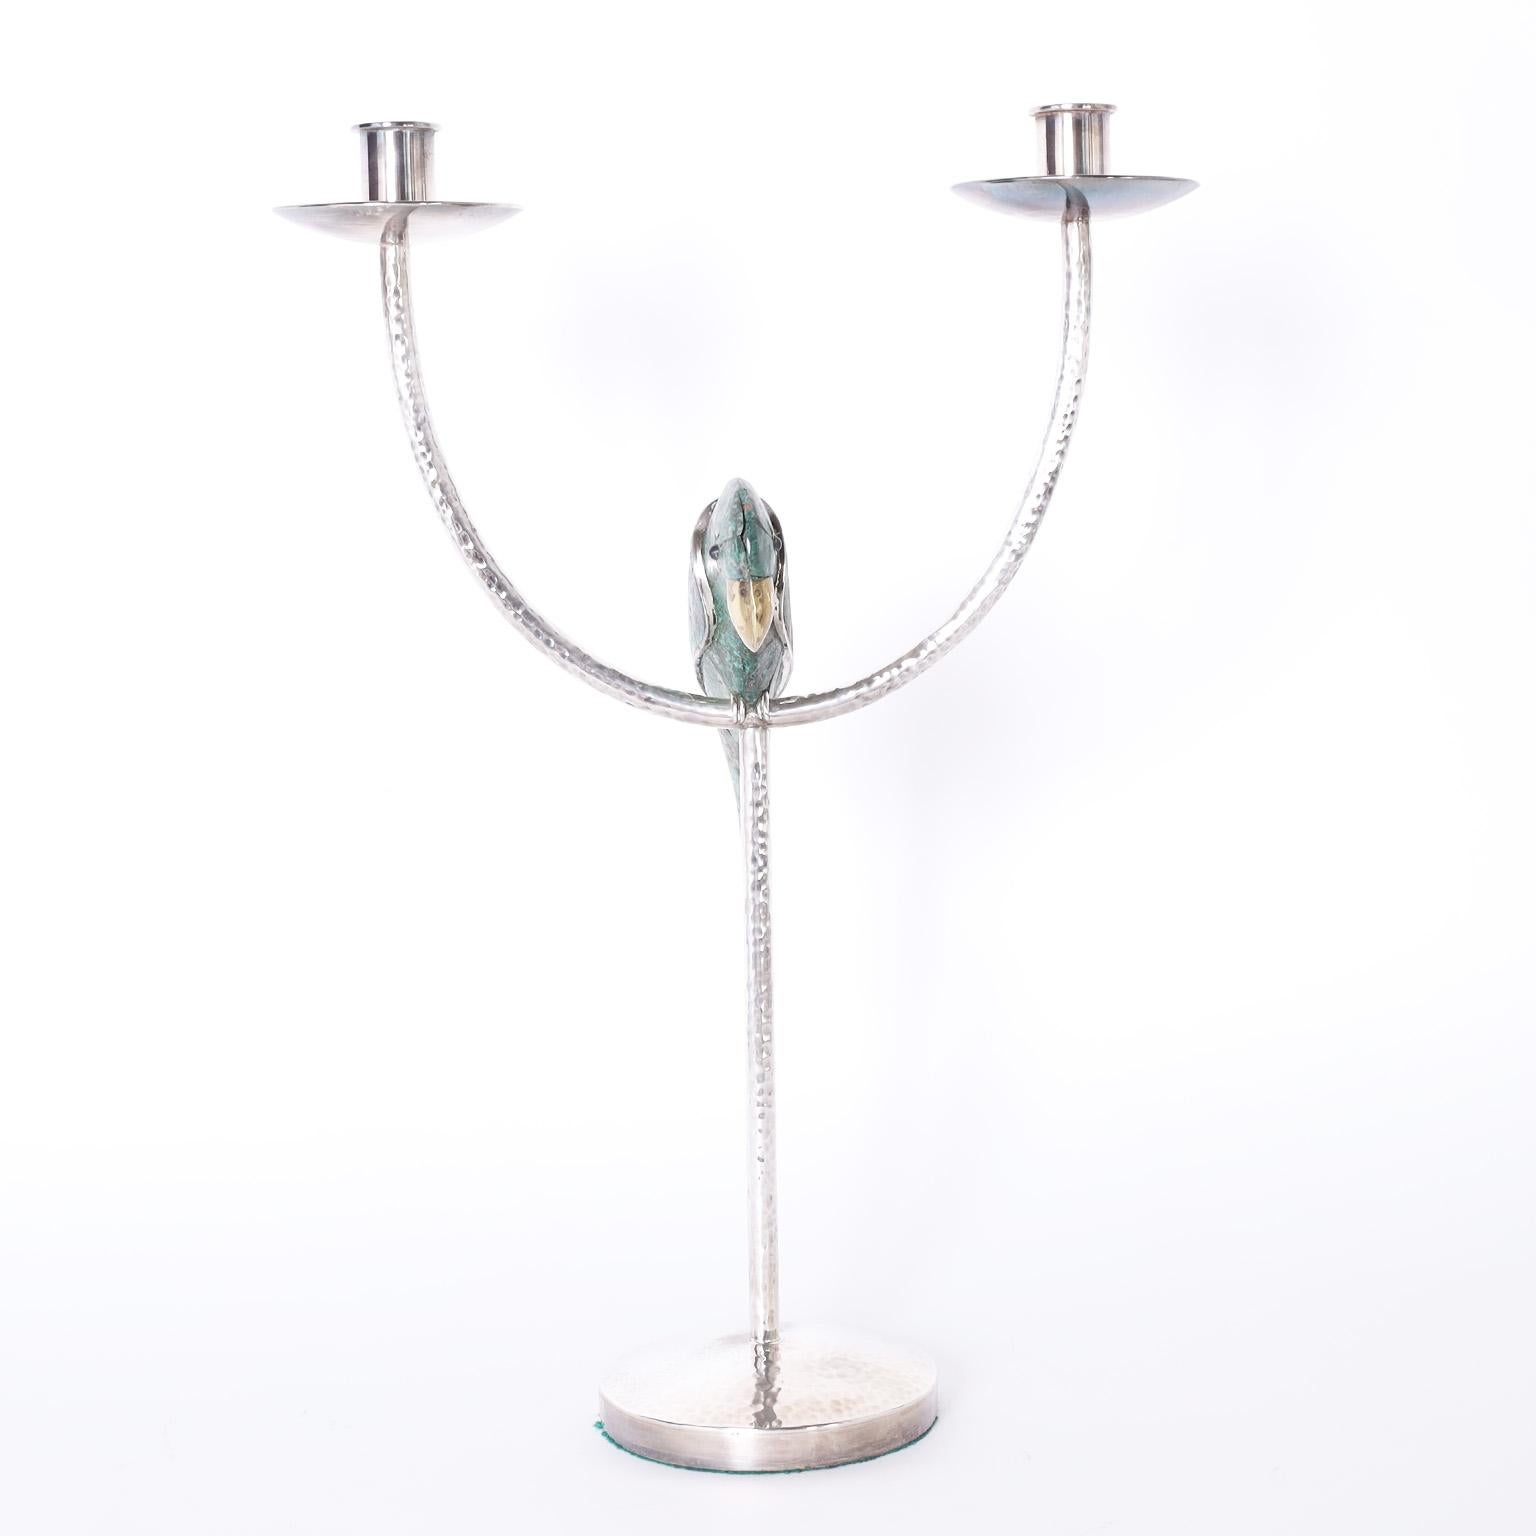 Enchanting two light candle stand hand crafted in silver plate over hammered copper featuring a stone clad bird or parrot. Signed Emilia Castillo 85 on the bottom.